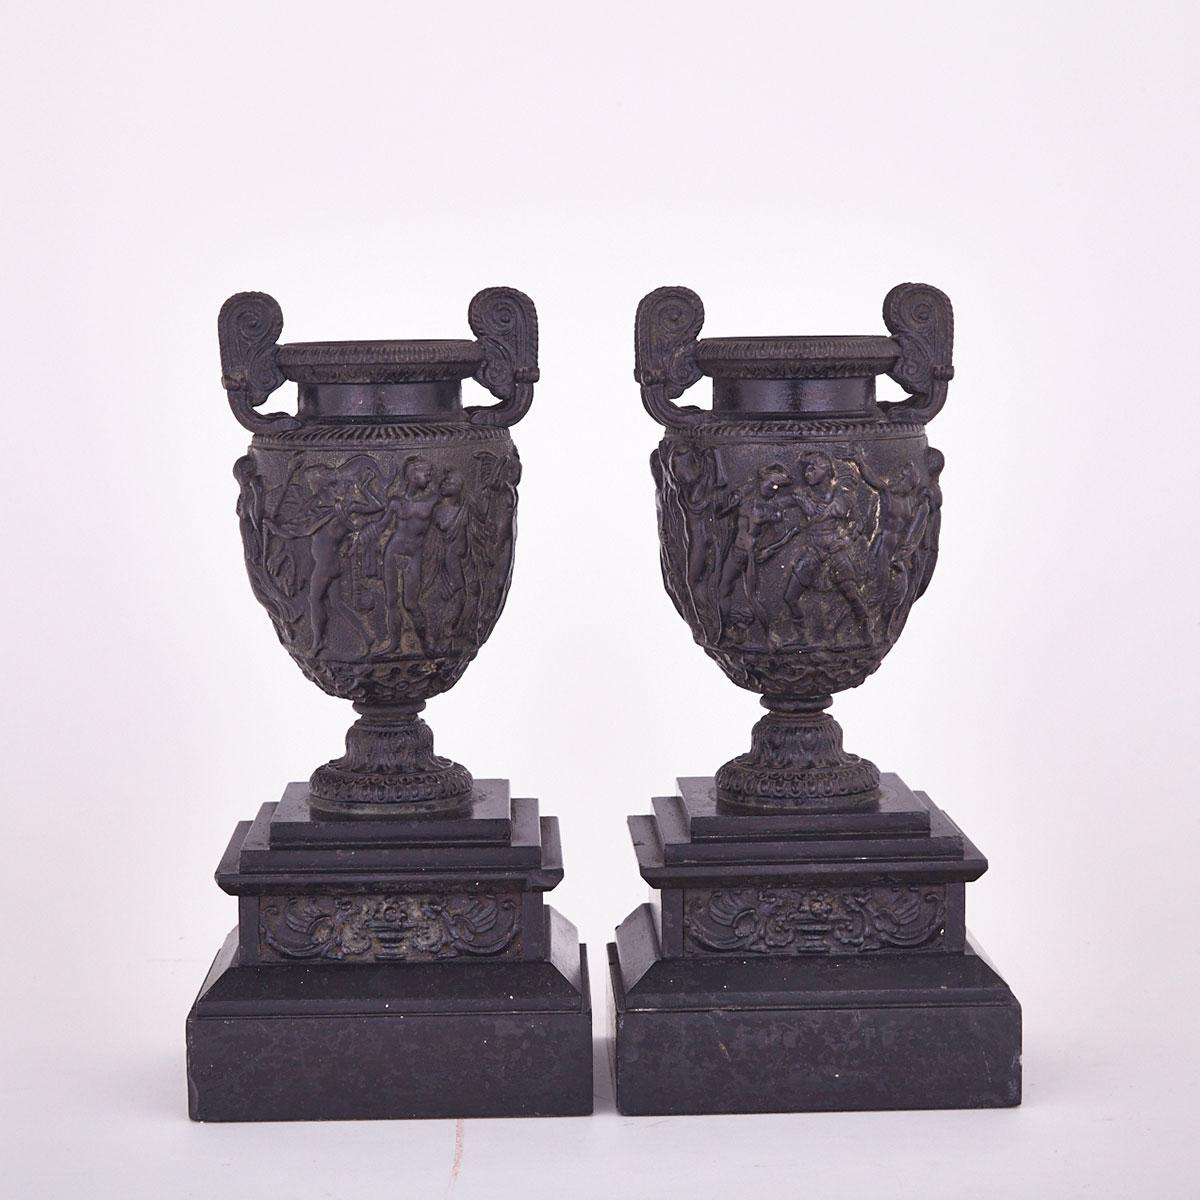 Pair of French Patinated Bronze and Marble Urn Form Mantel Garnitures, 19th century